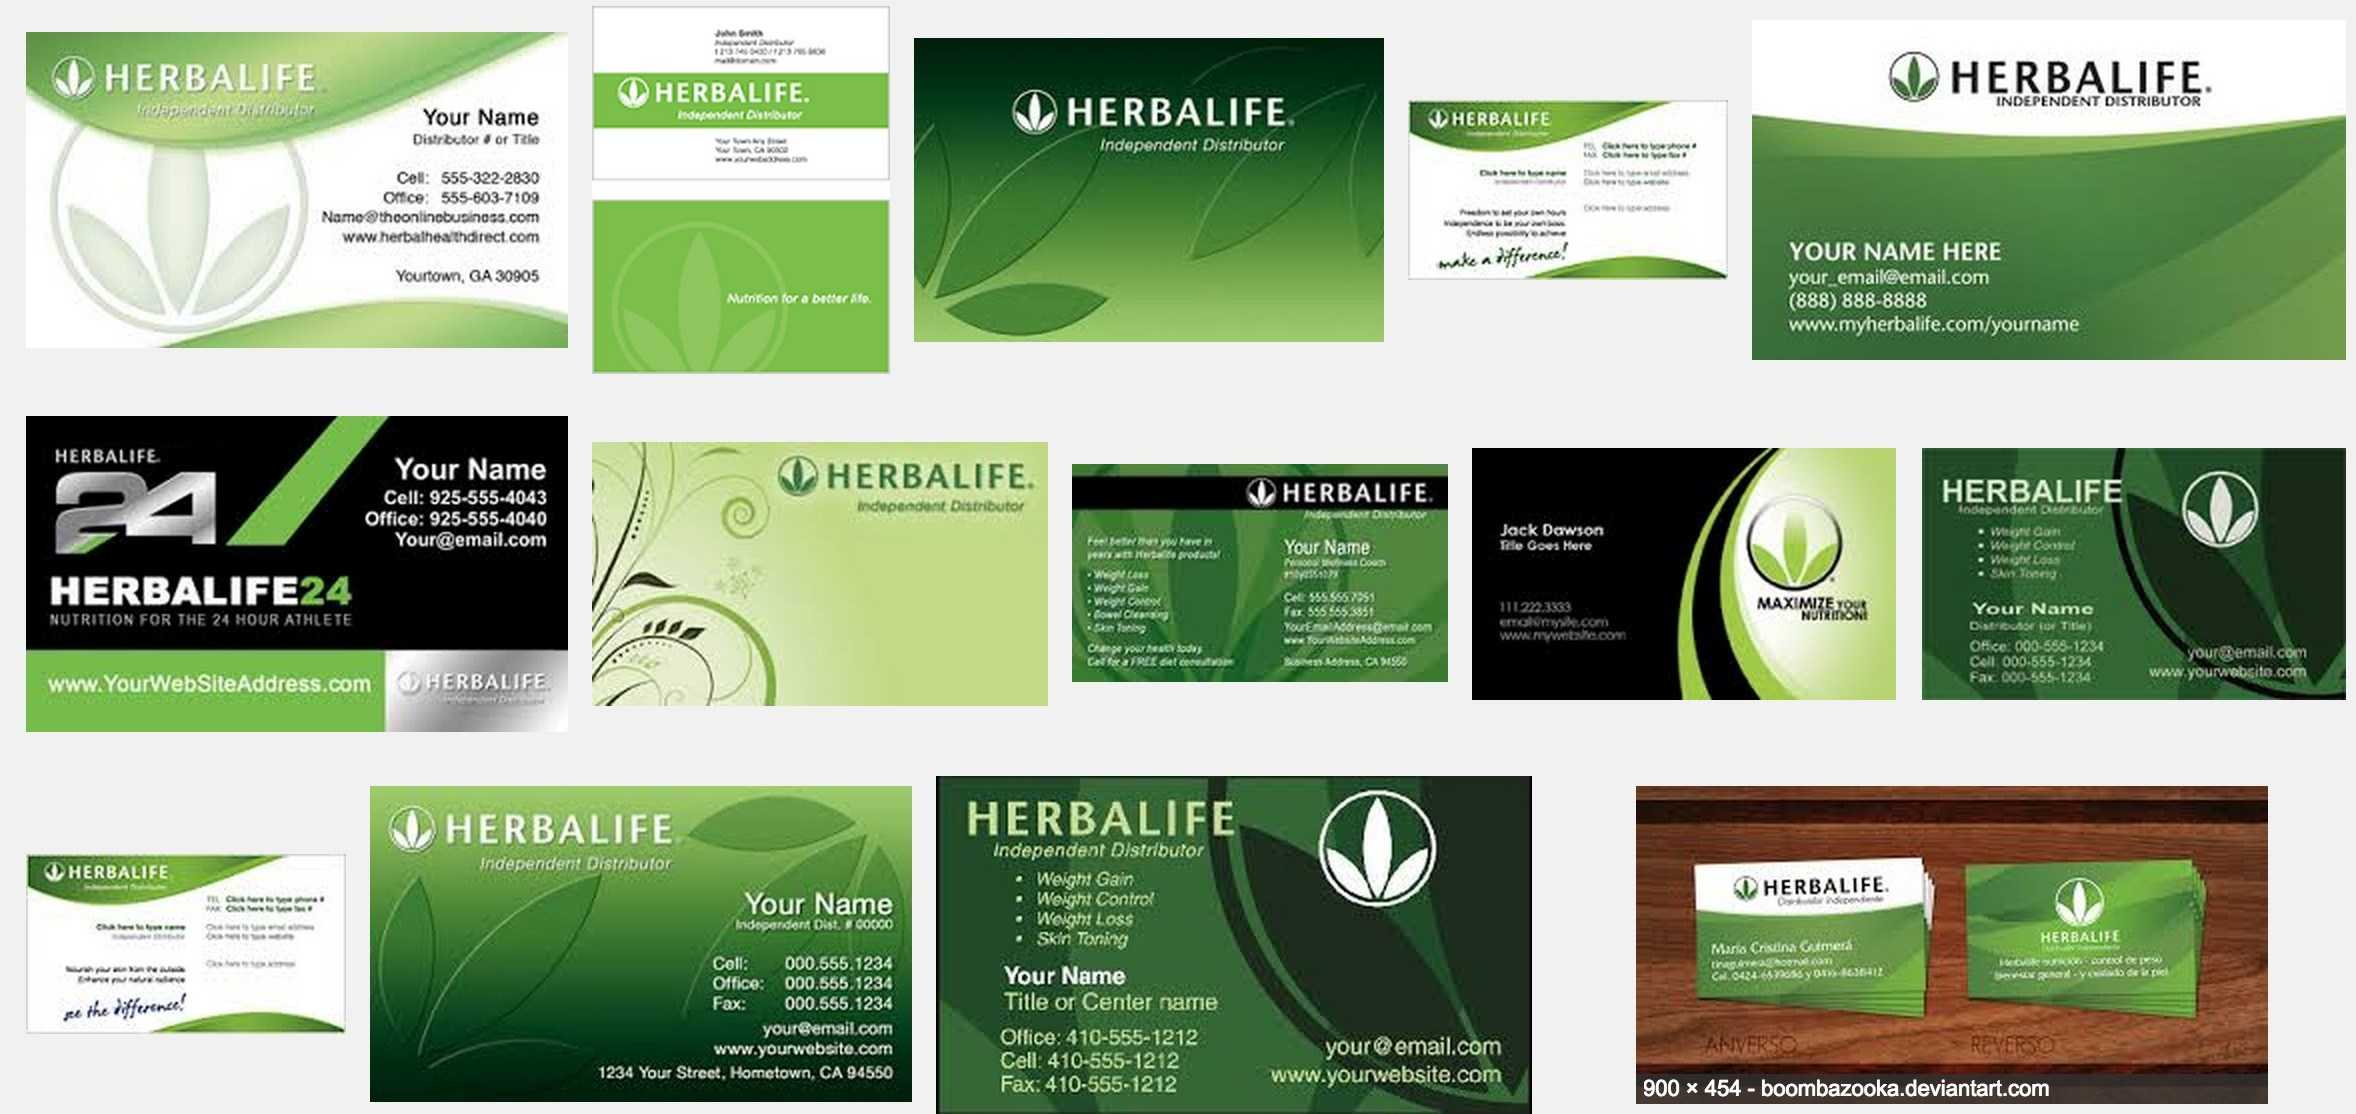 Advocare Business Card Template Herbalife Cards Uk New Order With Regard To Advocare Business Card Template